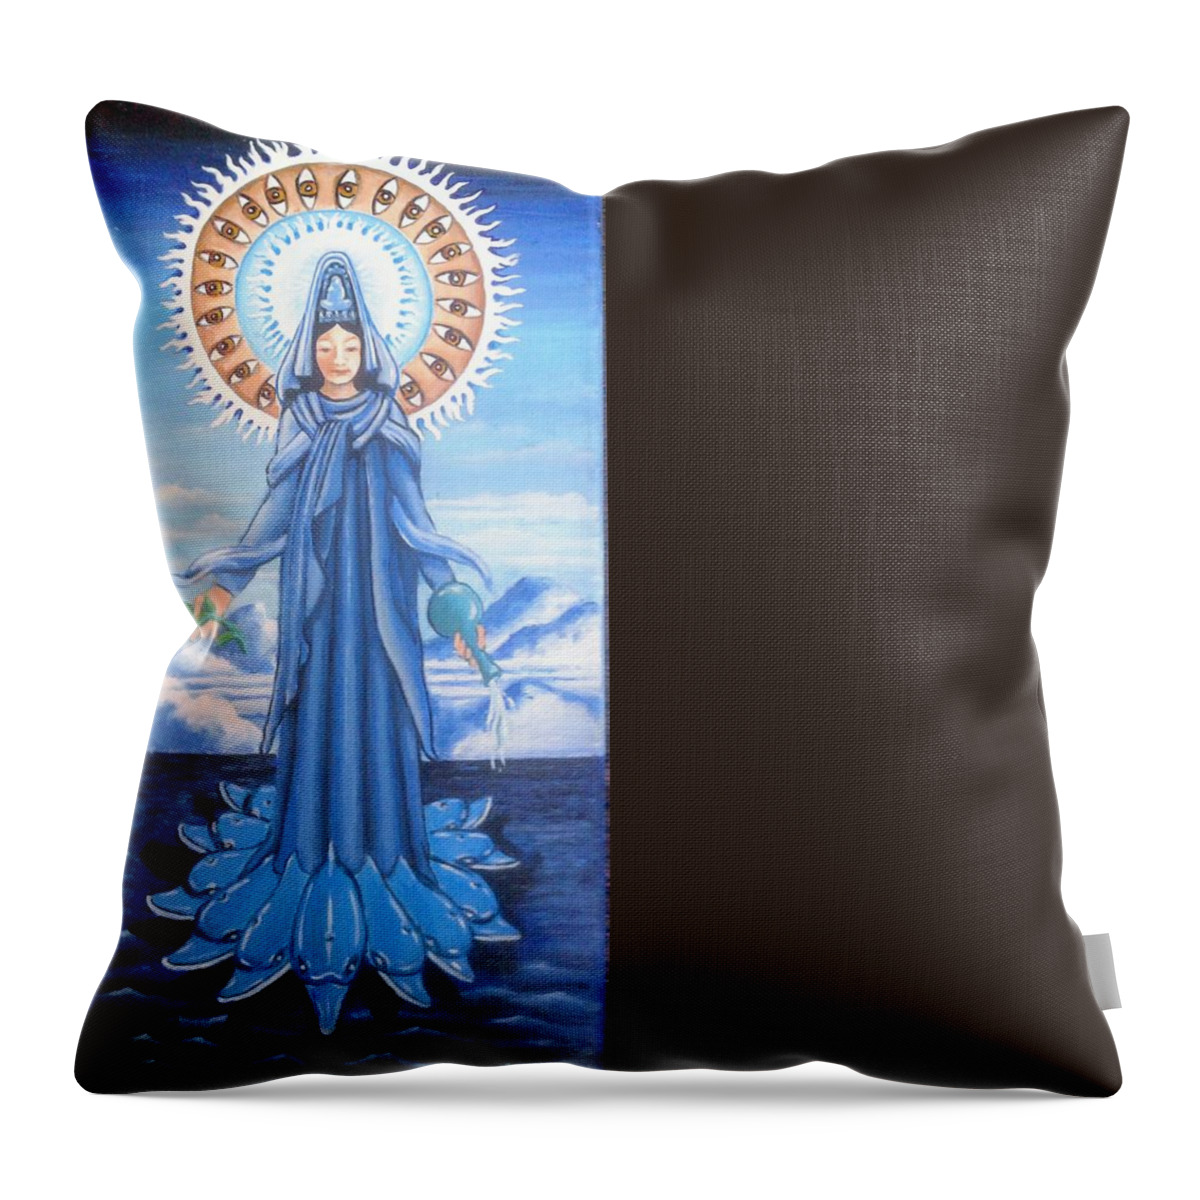 Kwan Yin Throw Pillow featuring the painting Kwan Yin Goddess of Compassion and Mercy by James RODERICK